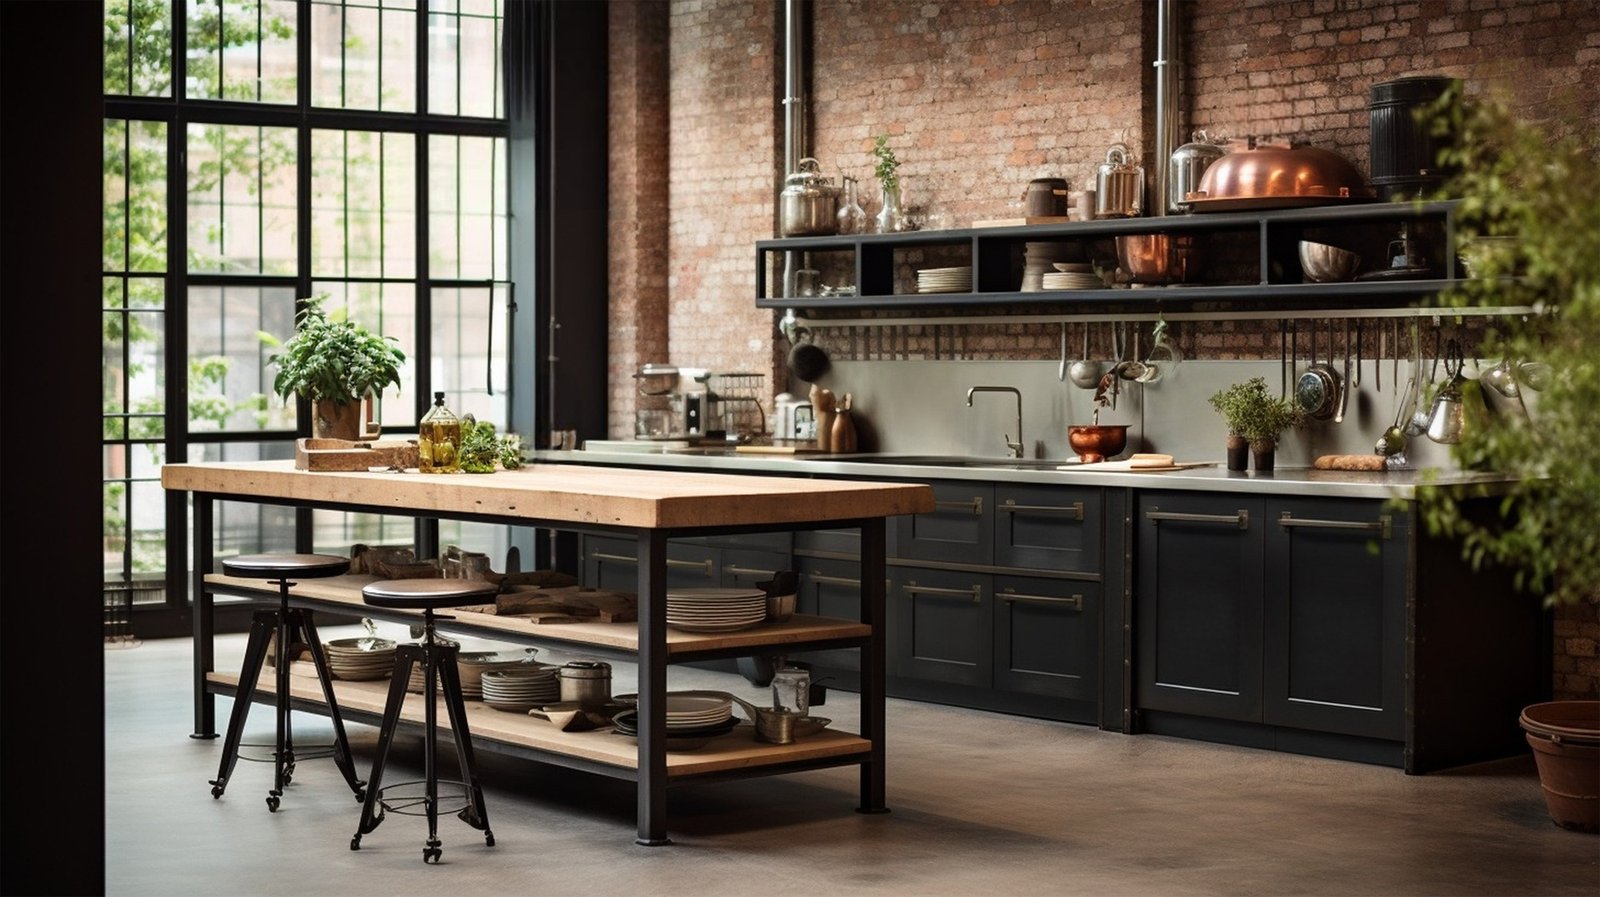 Industrial elegance, a black industrial kitchen with exposed bricks.